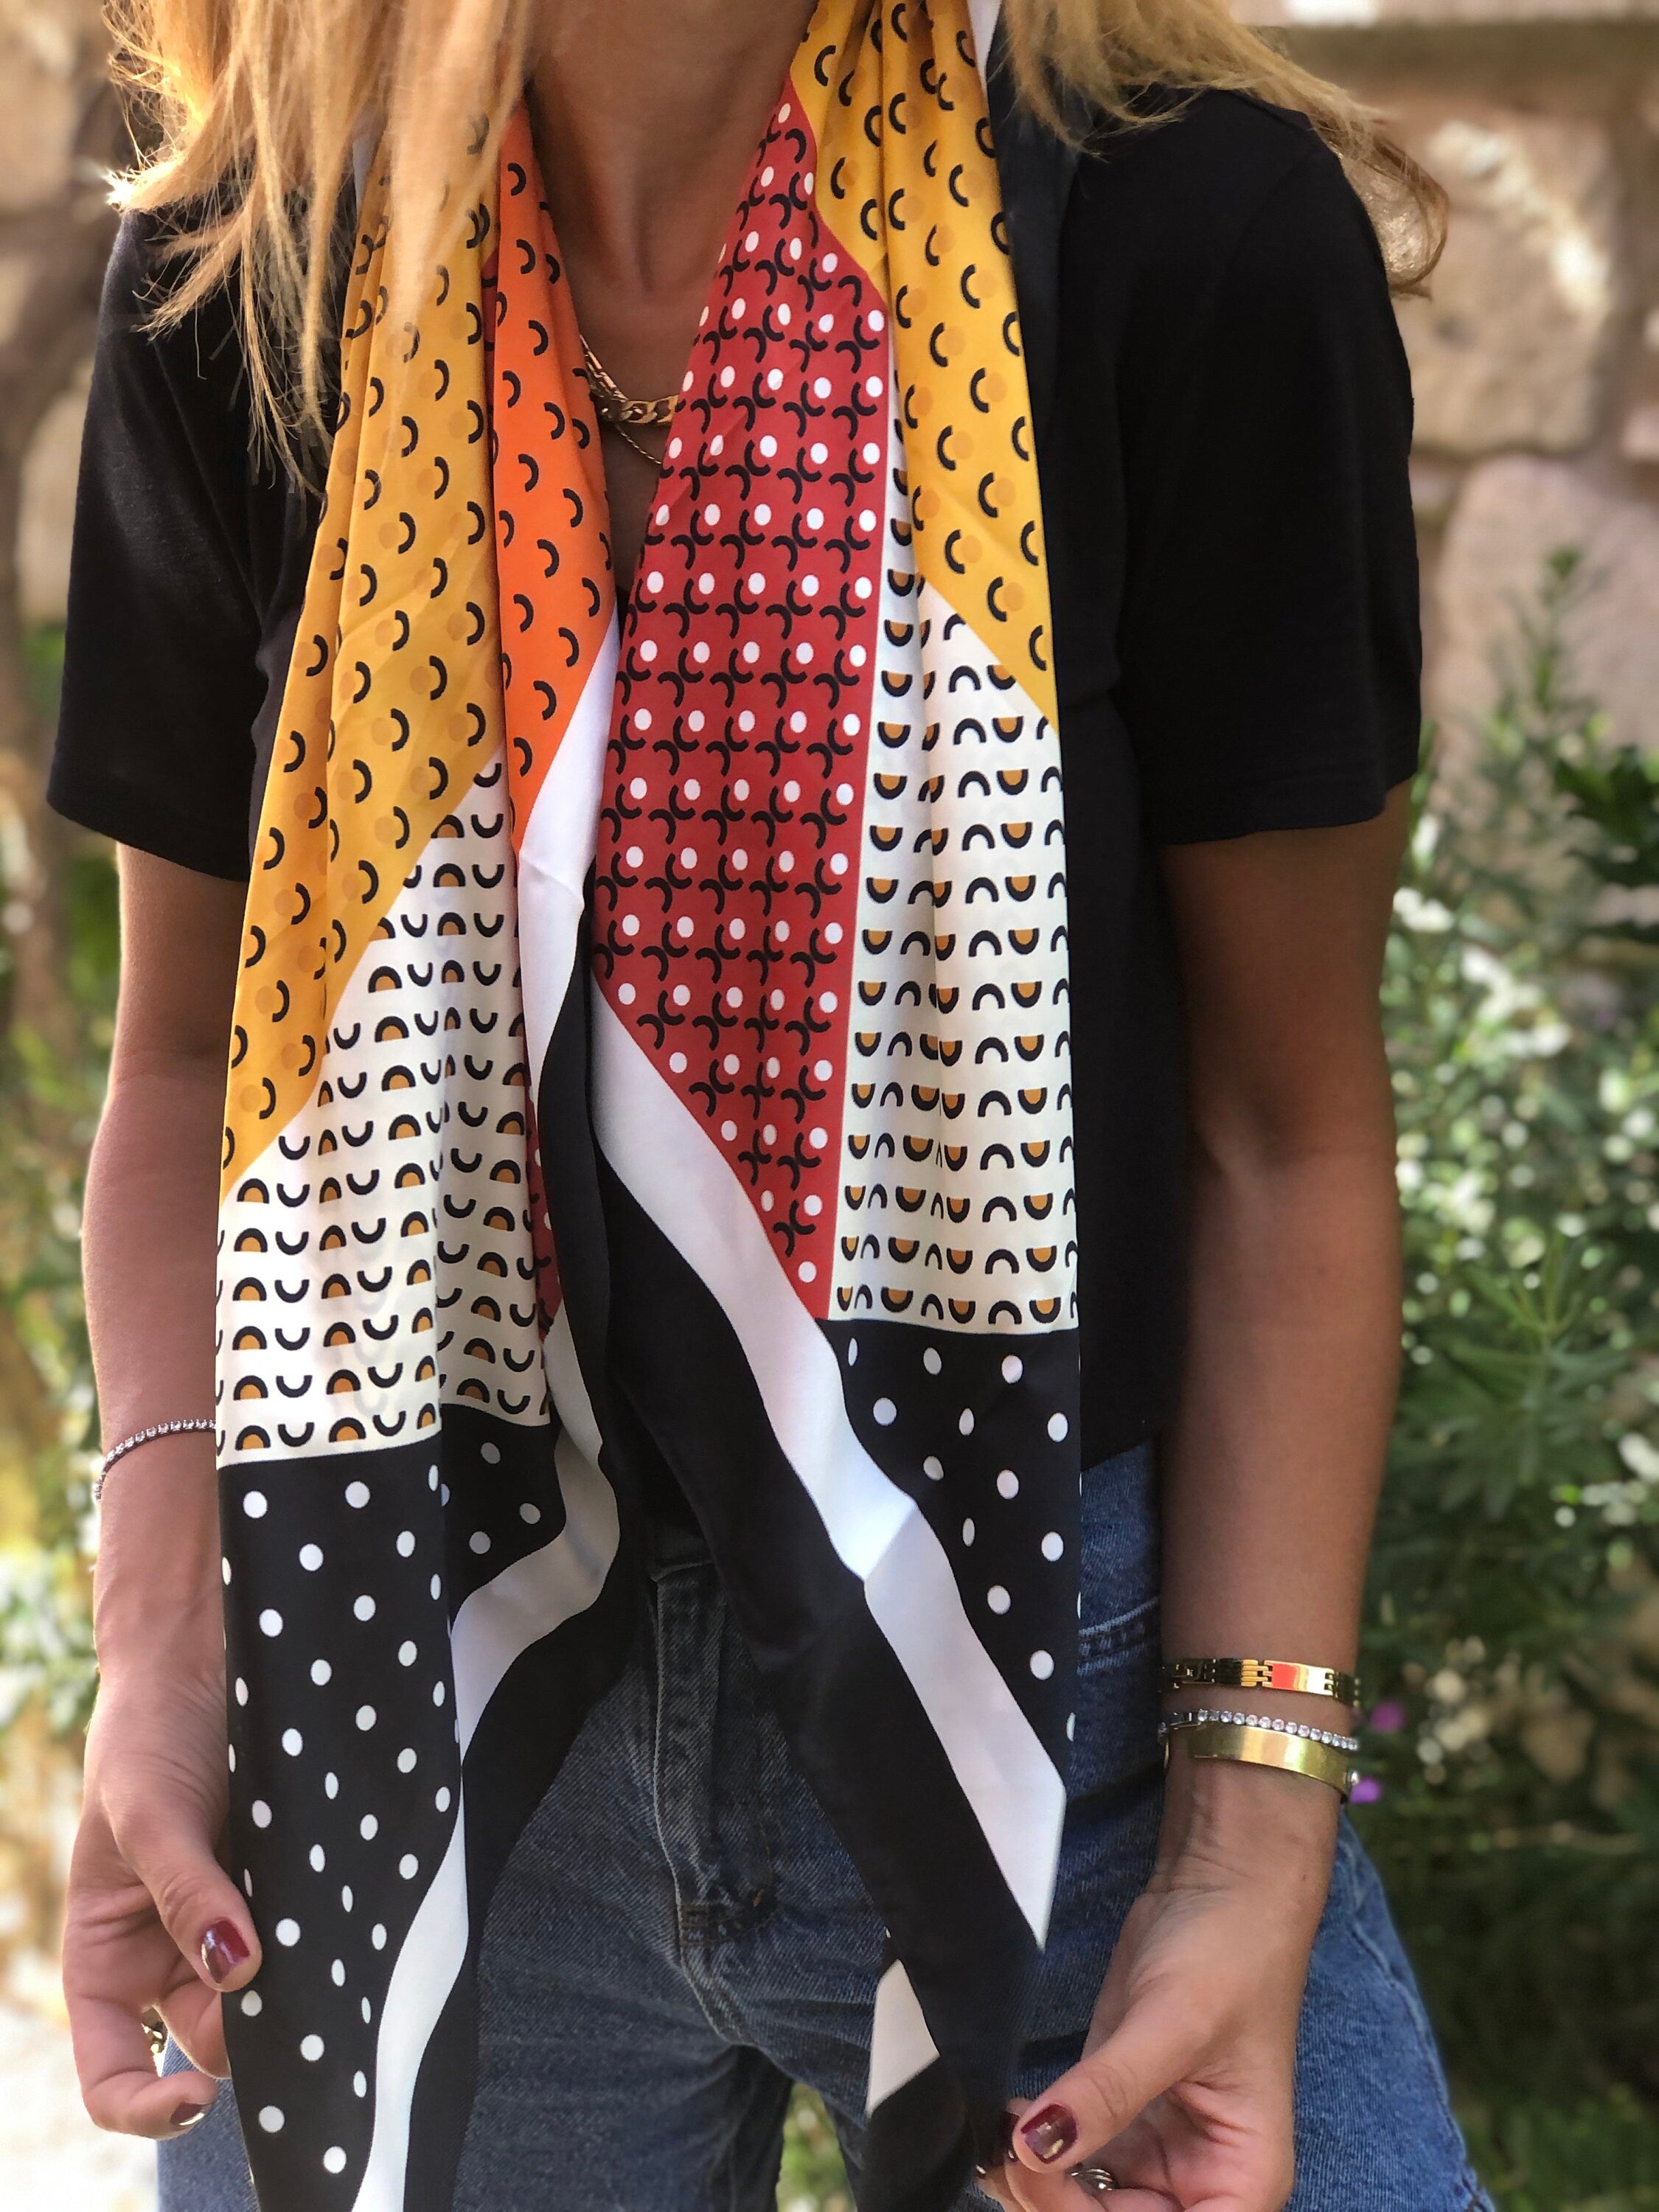 Make a statement with this stylish scarlet scarf. A must-have for any fashionista, it will brighten up any outfit.